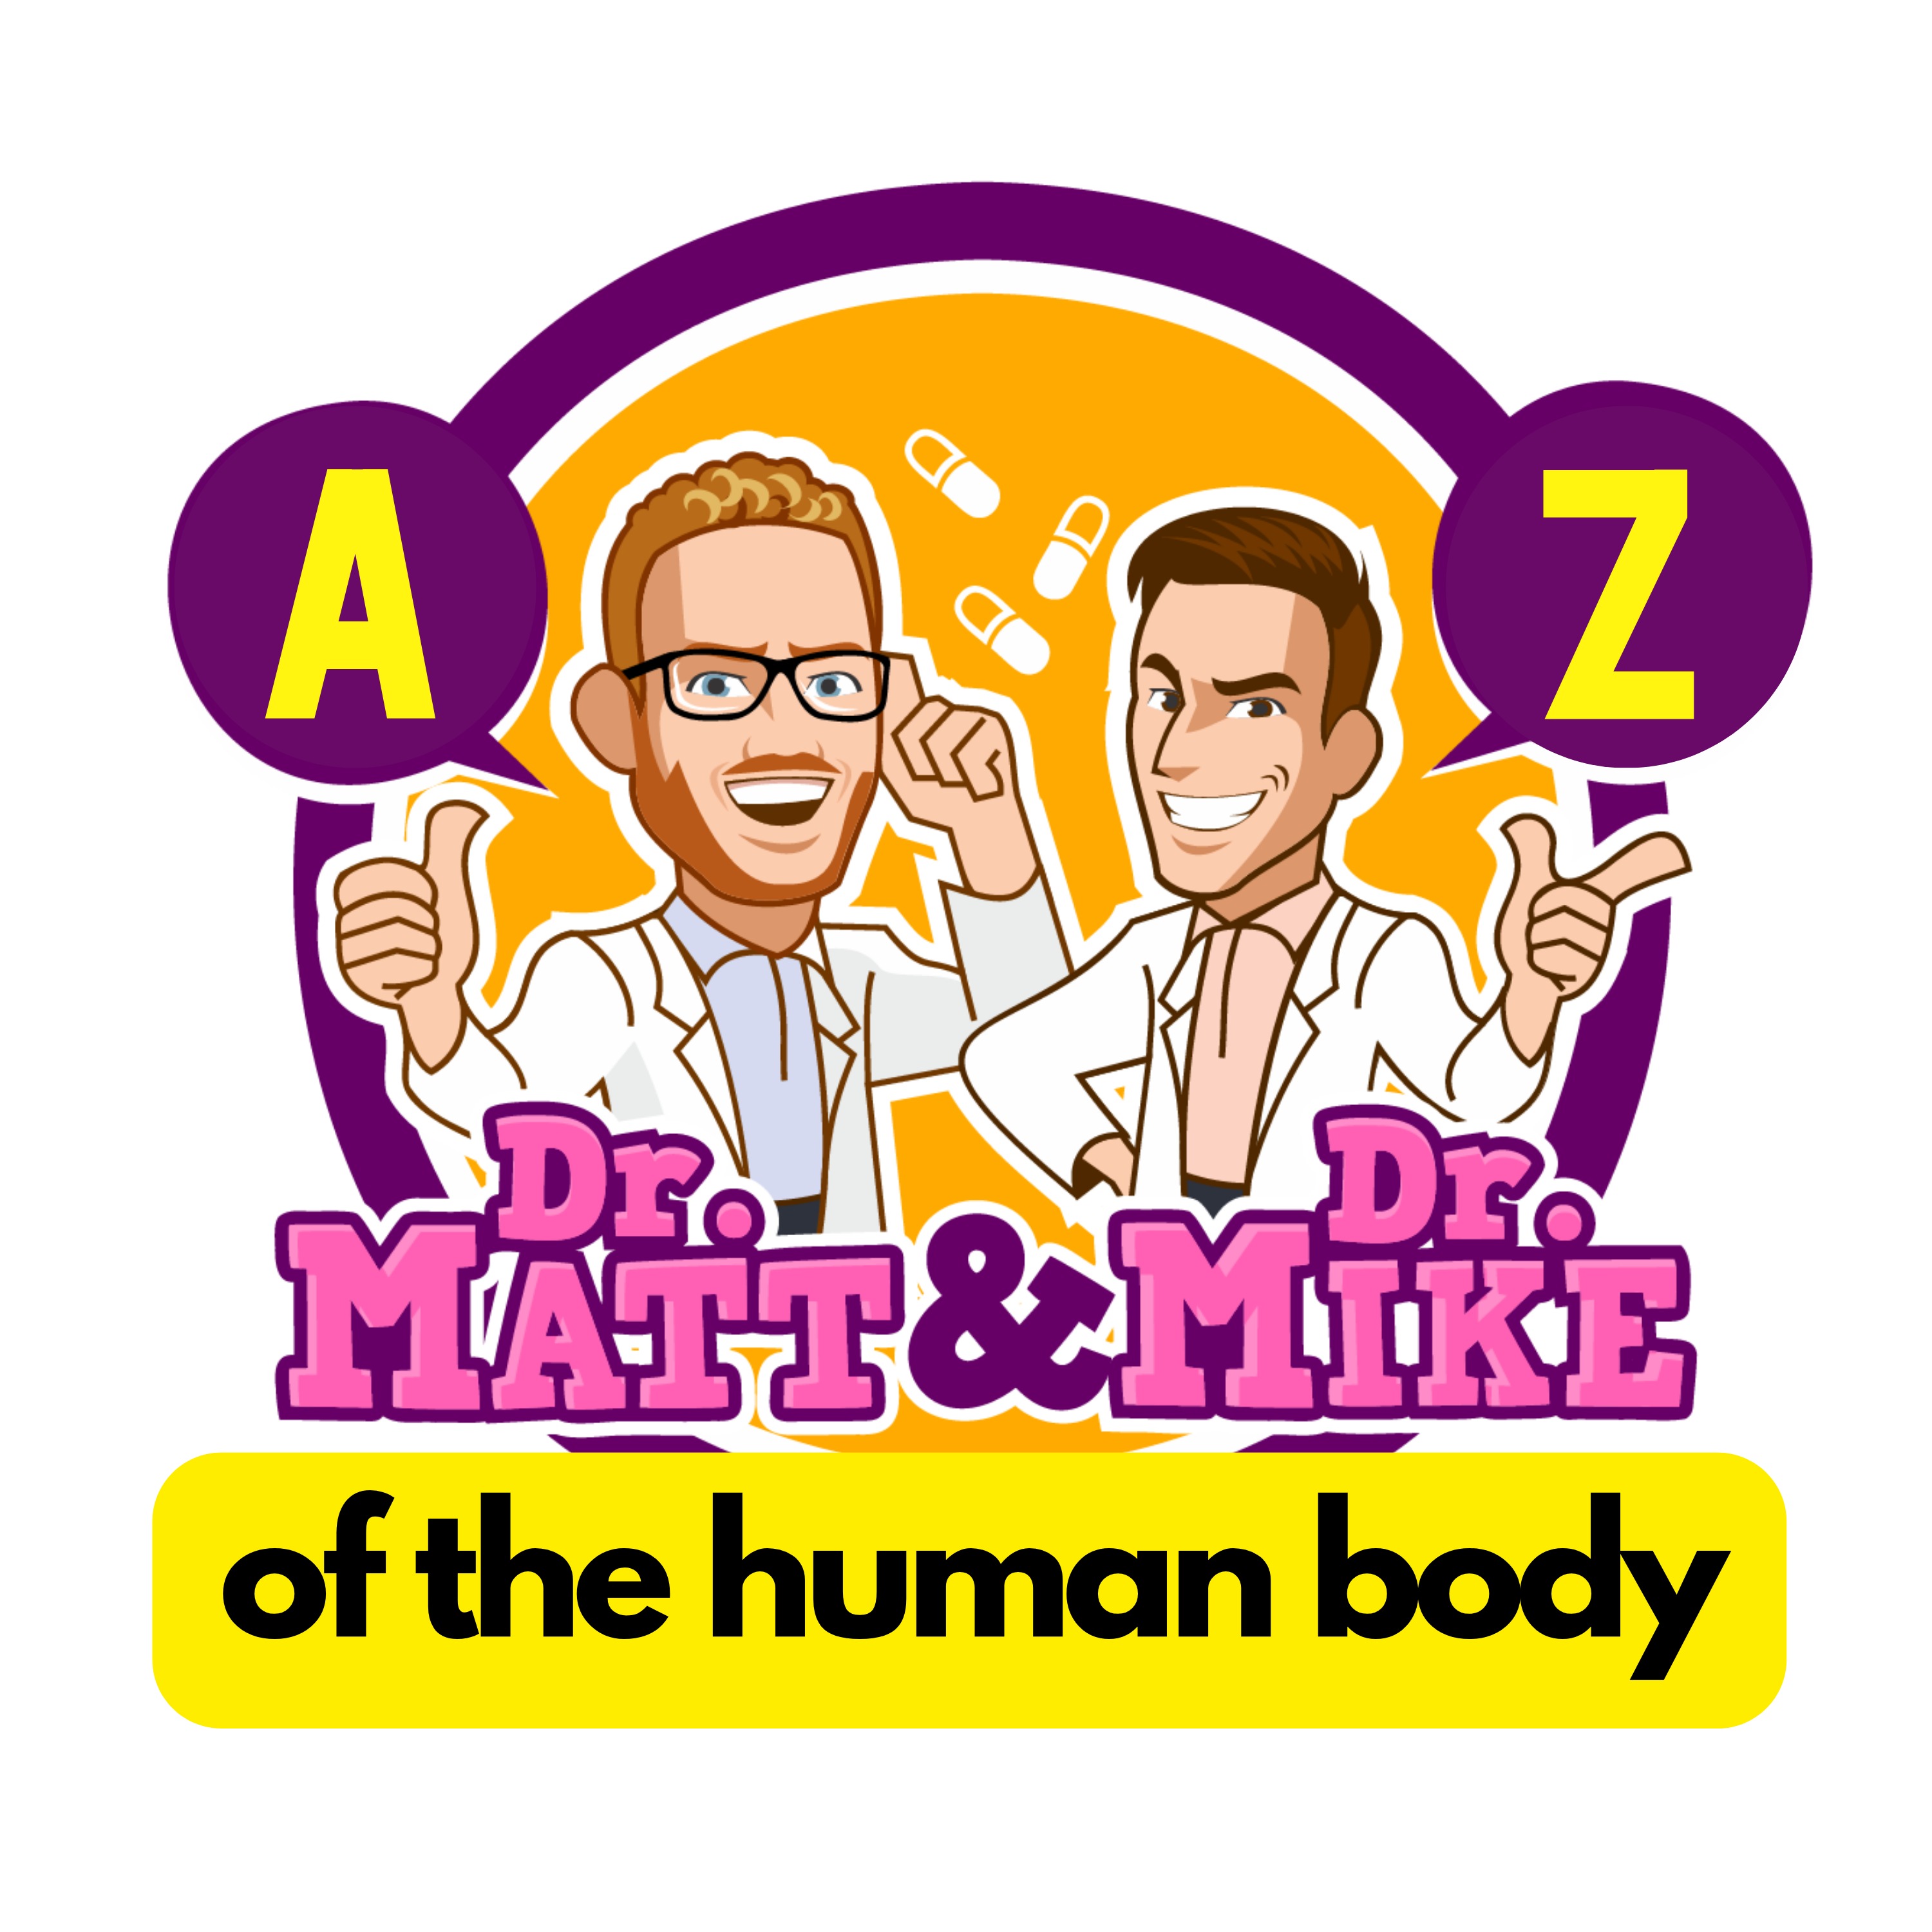 Adipocytes | A-Z of the Human Body